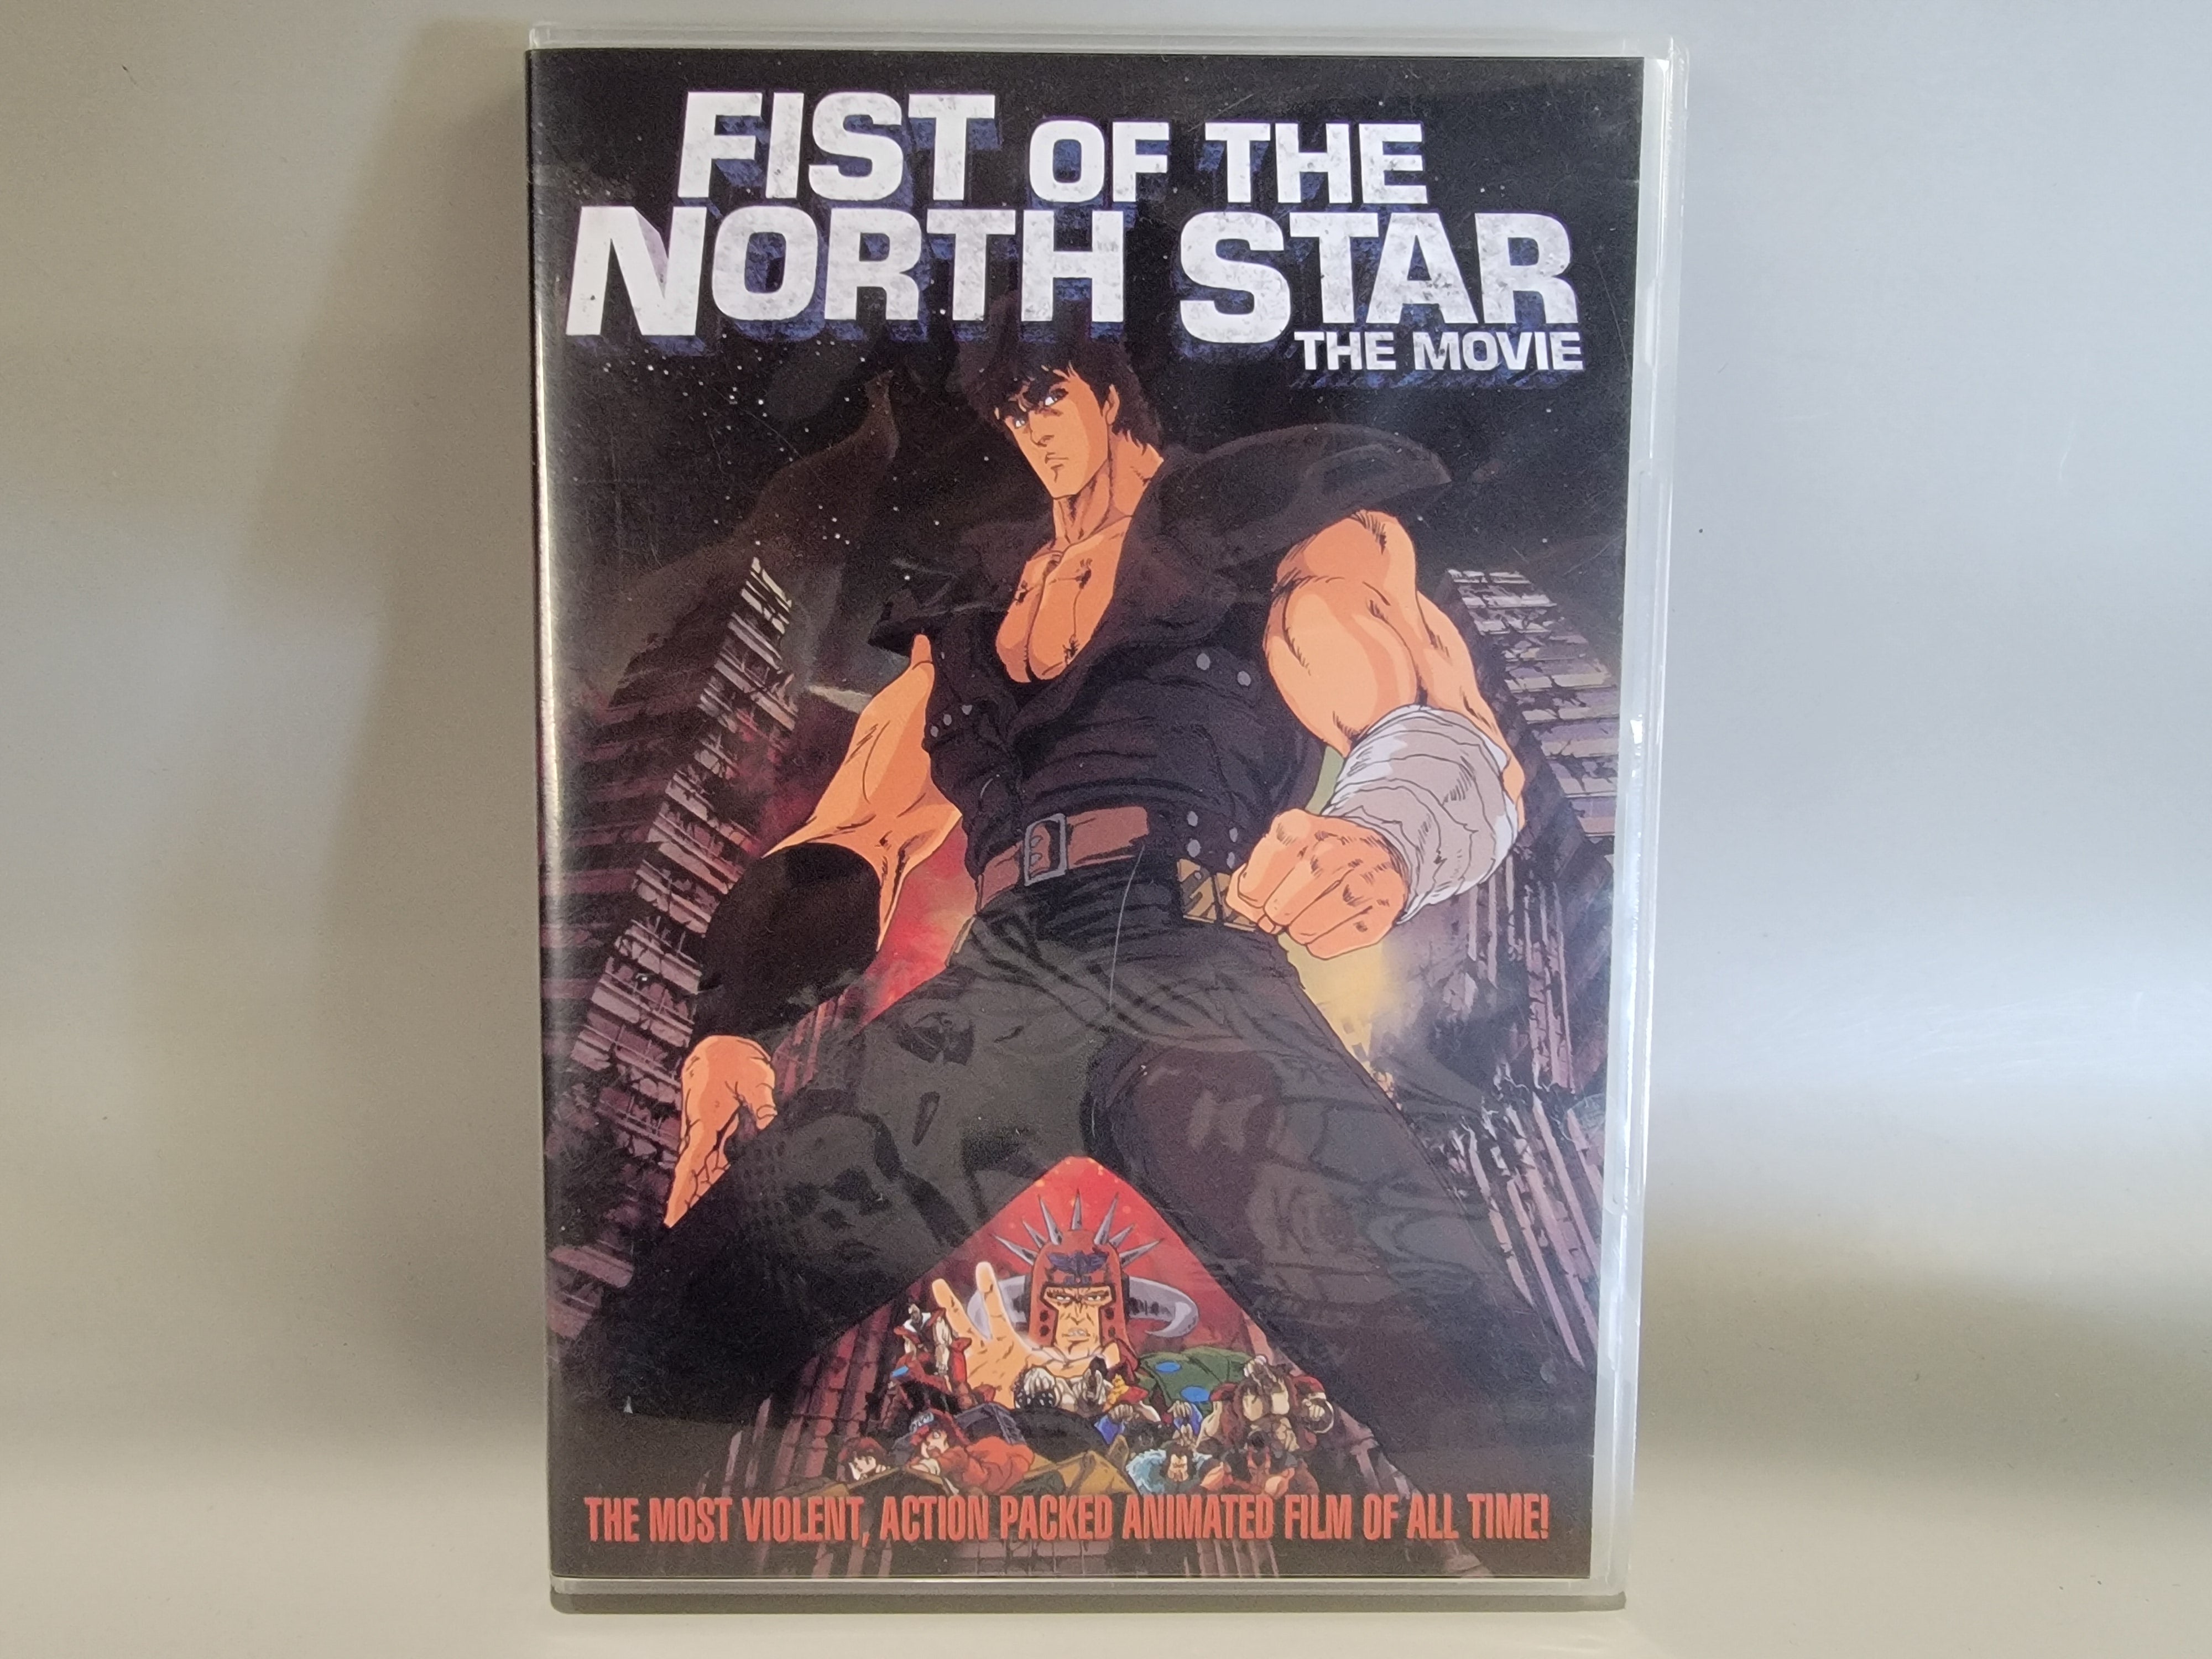 FIST OF THE NORTH STAR: THE MOVIE DVD [USED]